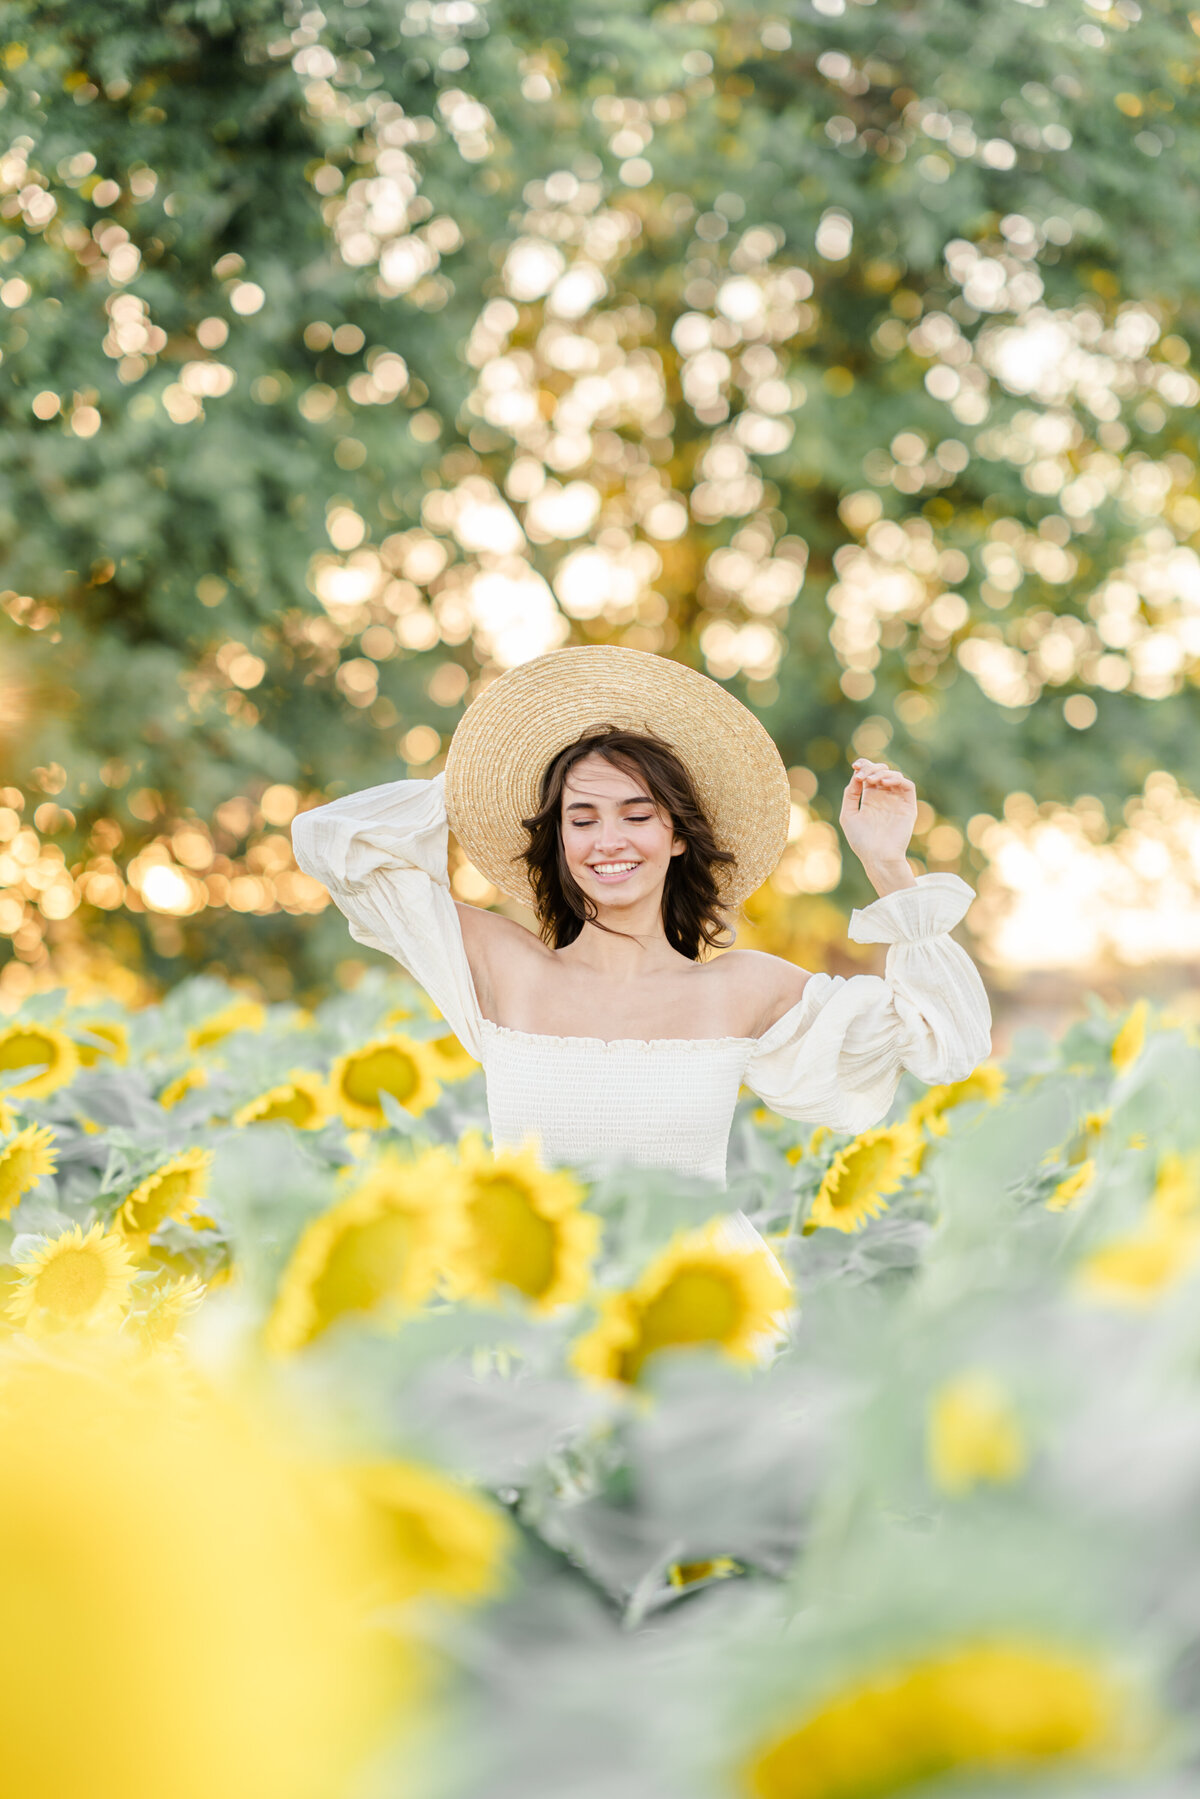 A portrait session photographed by Bay Area Photographer, Light Livin Photography shows a woman dancing in a field of sunflowers.